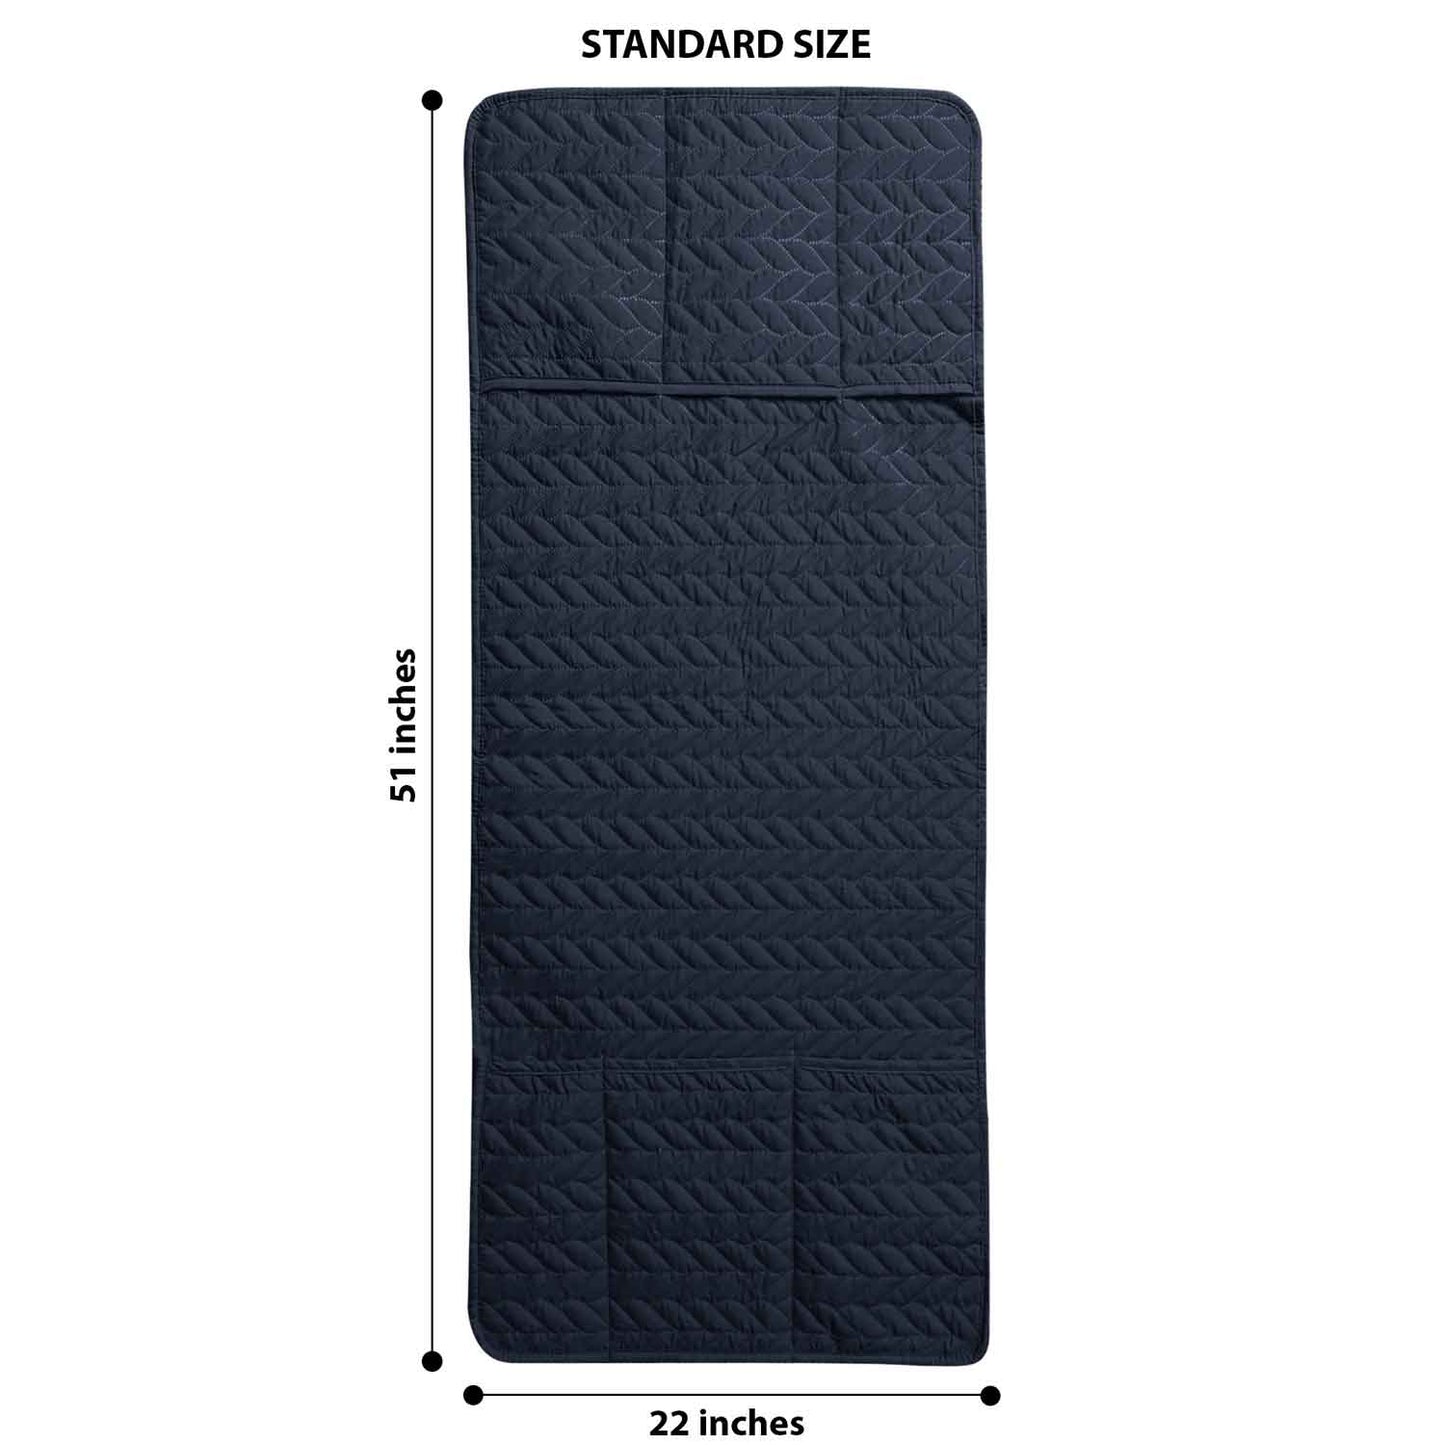 Dustproof Quilted Refrigerator Cover With Side Pockets-Navy Blue